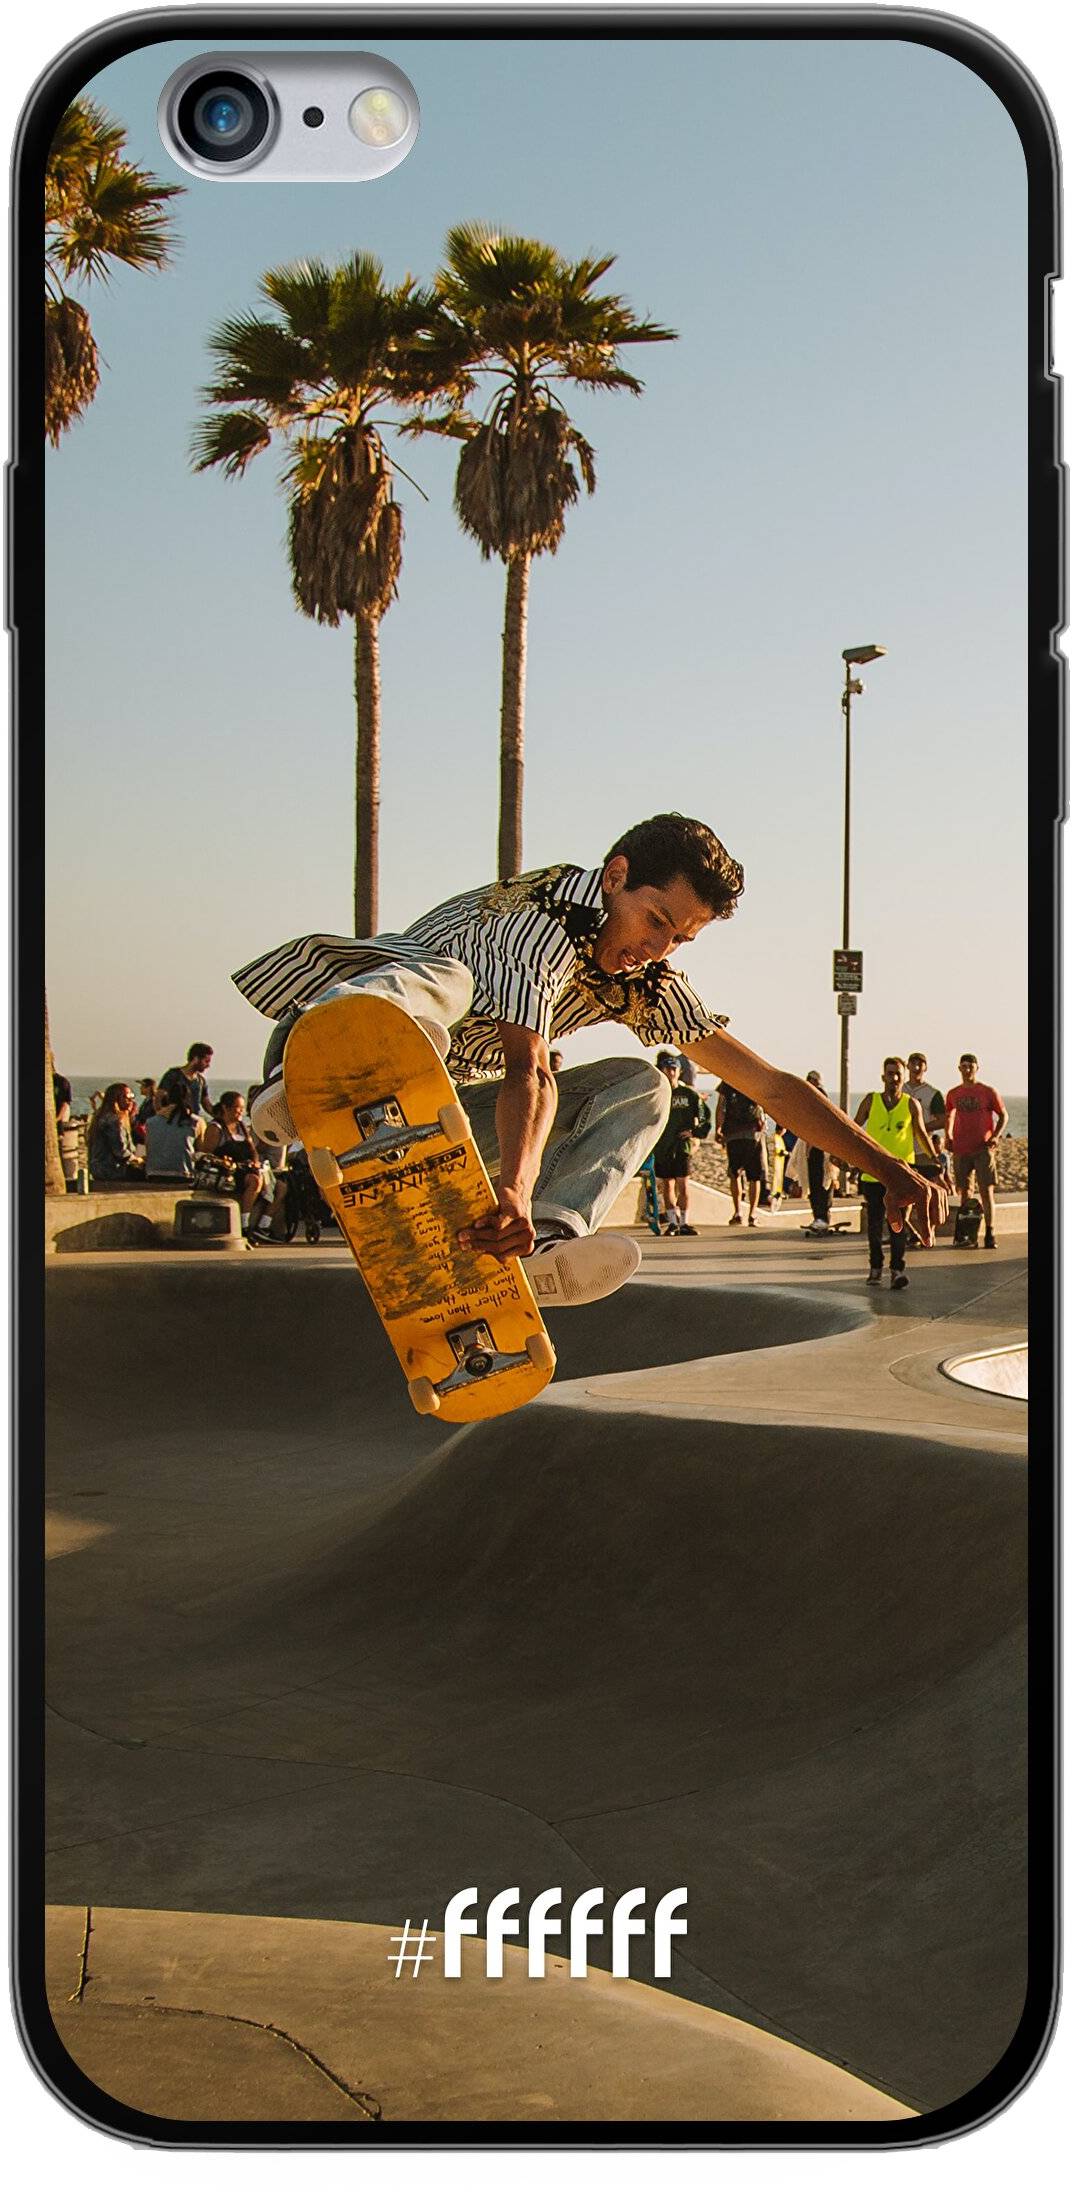 Let's Skate iPhone 6s